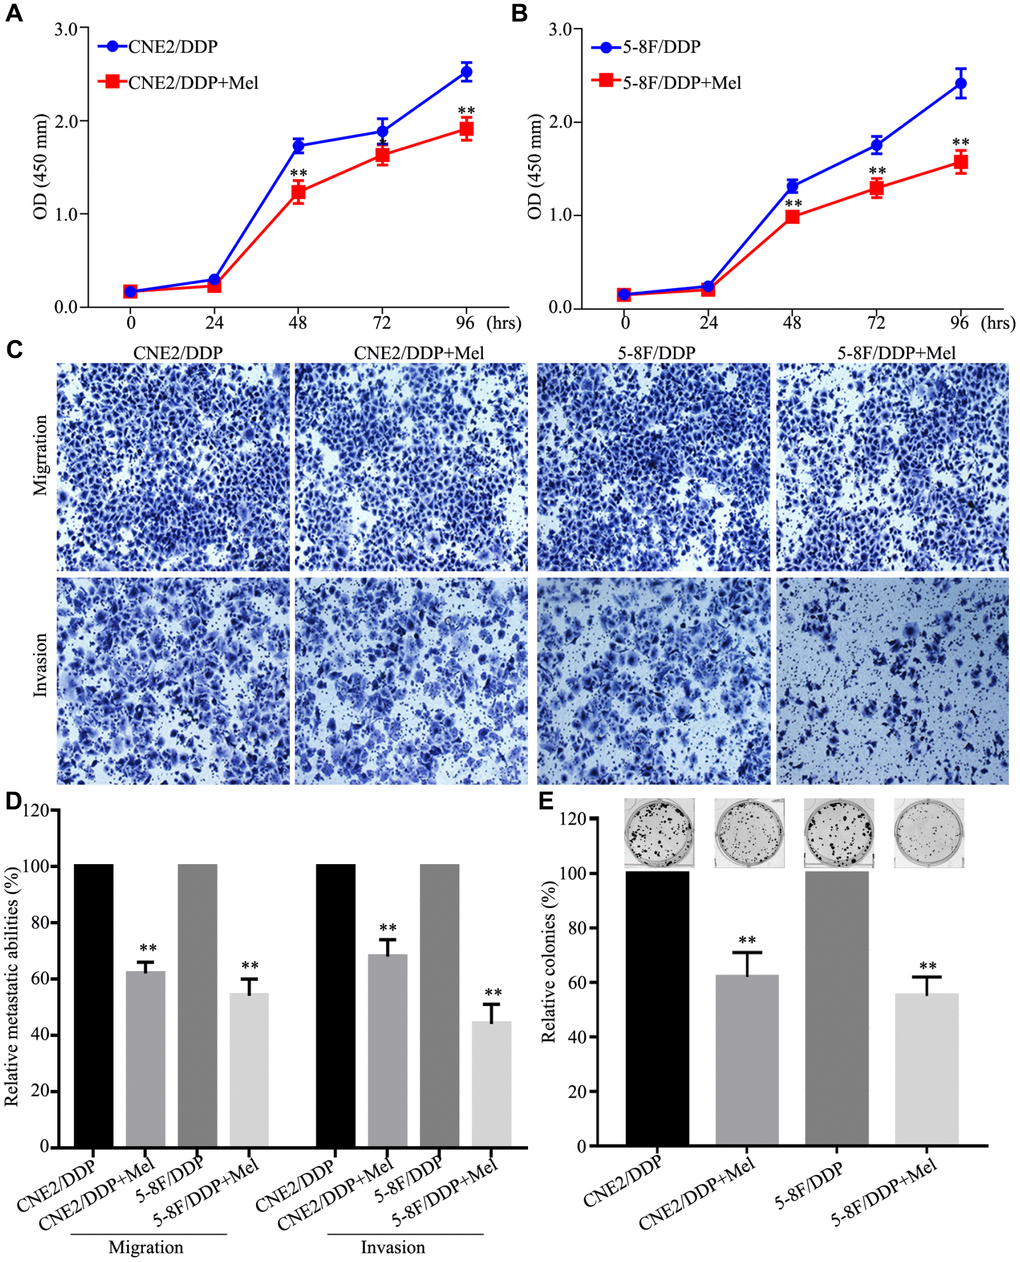 Melatonin reverses DDP chemoresistance in NPC DDP-resistant cells. (A, B) The cell viability of the CNE2/DDP (A) and 5-8F/DDP (B) cells treated with melatonin (2 mM) was determined by CCK-8 assay. (C, D) Images (C) and quantification (D) of transwell migration and invasion assays. (E) Images (up) and quantification (down) clonogenic colony formation assays of the CNE2/DDP and 5-8F/DDP cells treated with melatonin for 2 weeks. All of the experiments were performed at least three times. Data presented are the mean ± SD; **P P t-test.